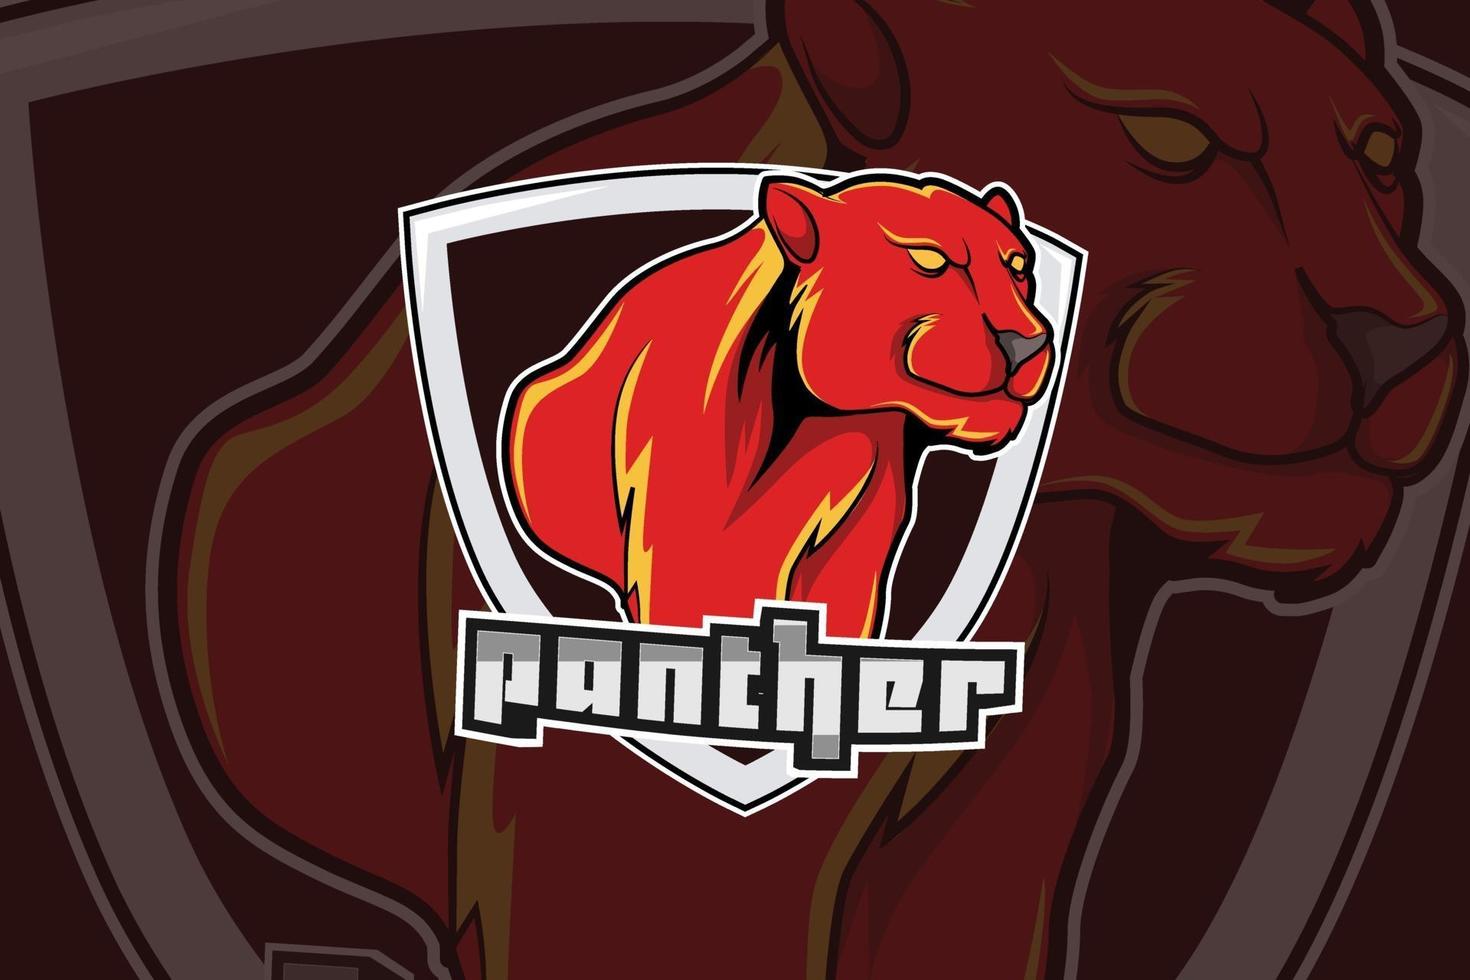 panther for sports and esports logo isolated on dark background vector